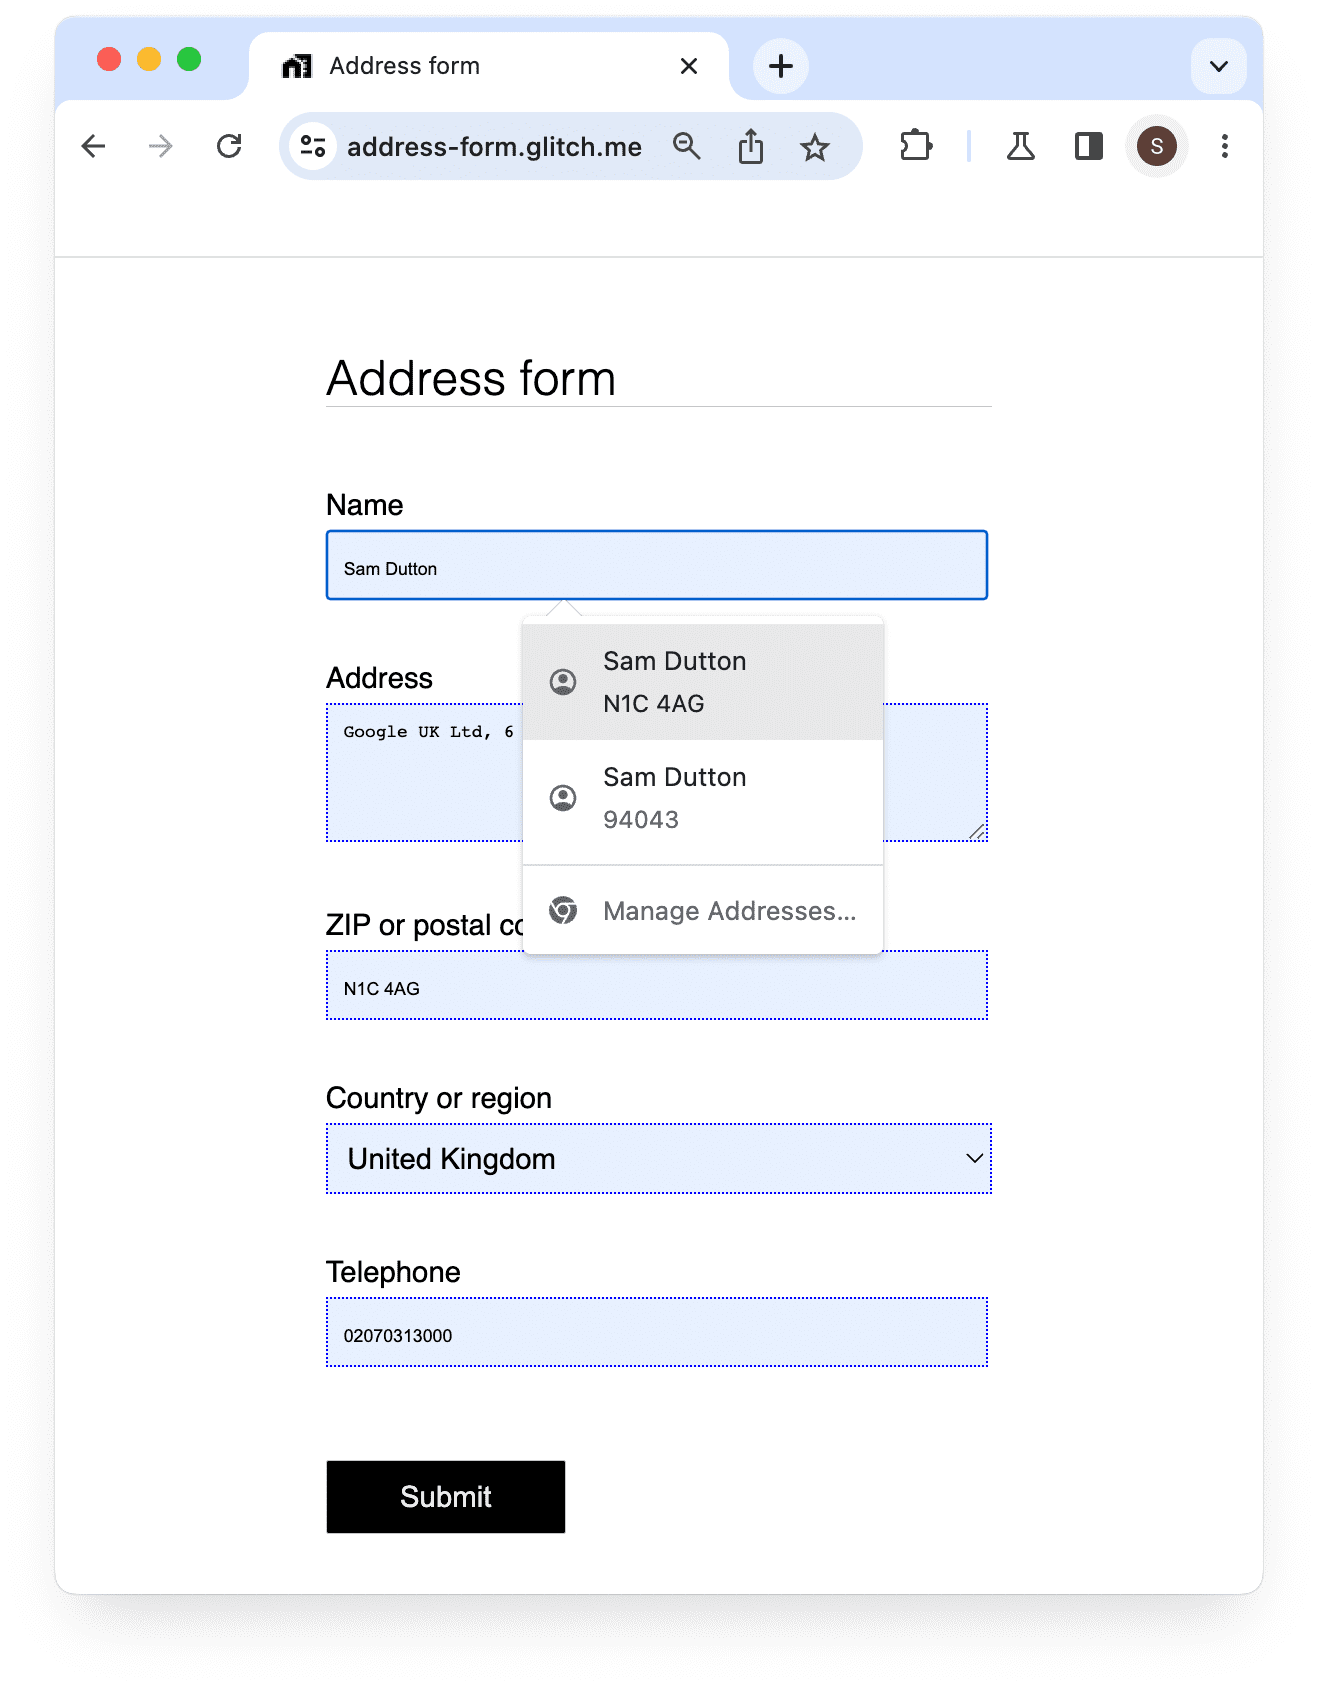 Chrome offering to autofill an address form on desktop